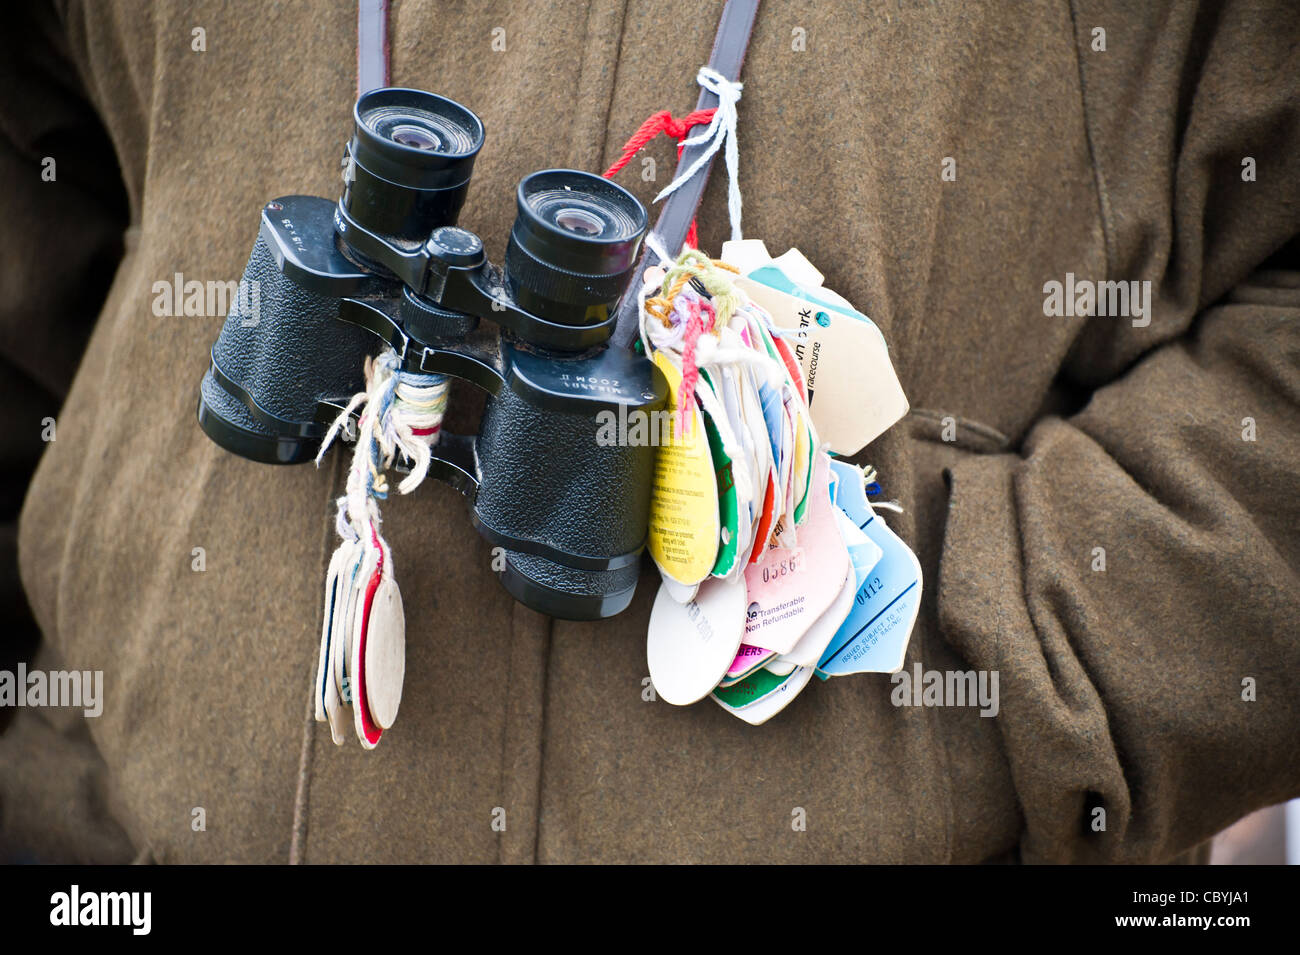 Pair of binoculars round a persons neck with lots of racecourse entry passes attached. Stock Photo